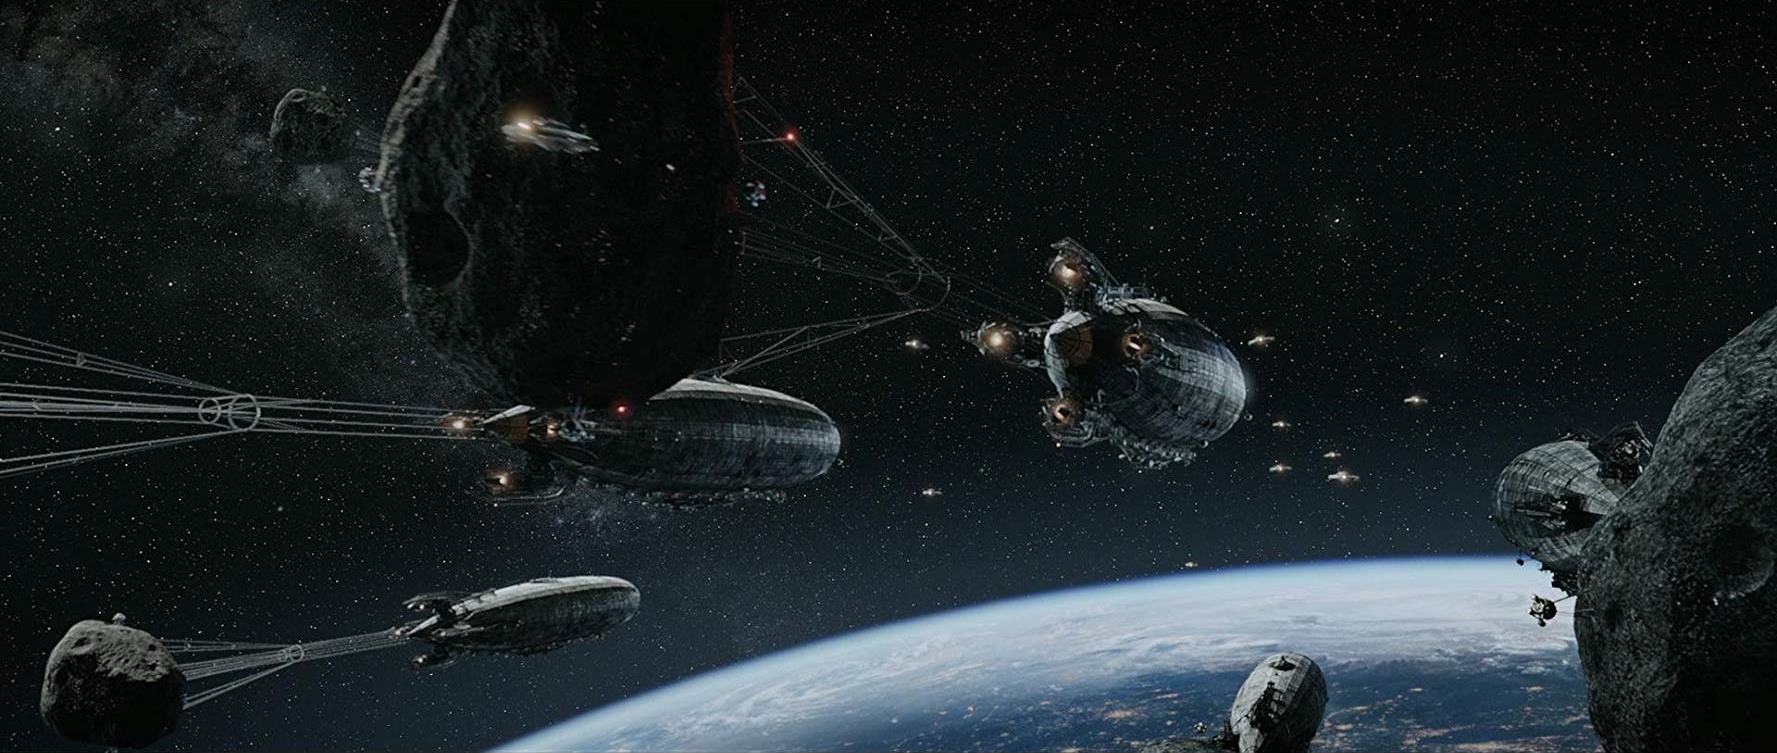 Spacegoing zeppelins towing asteroids into battle in Iron Sky (2012)